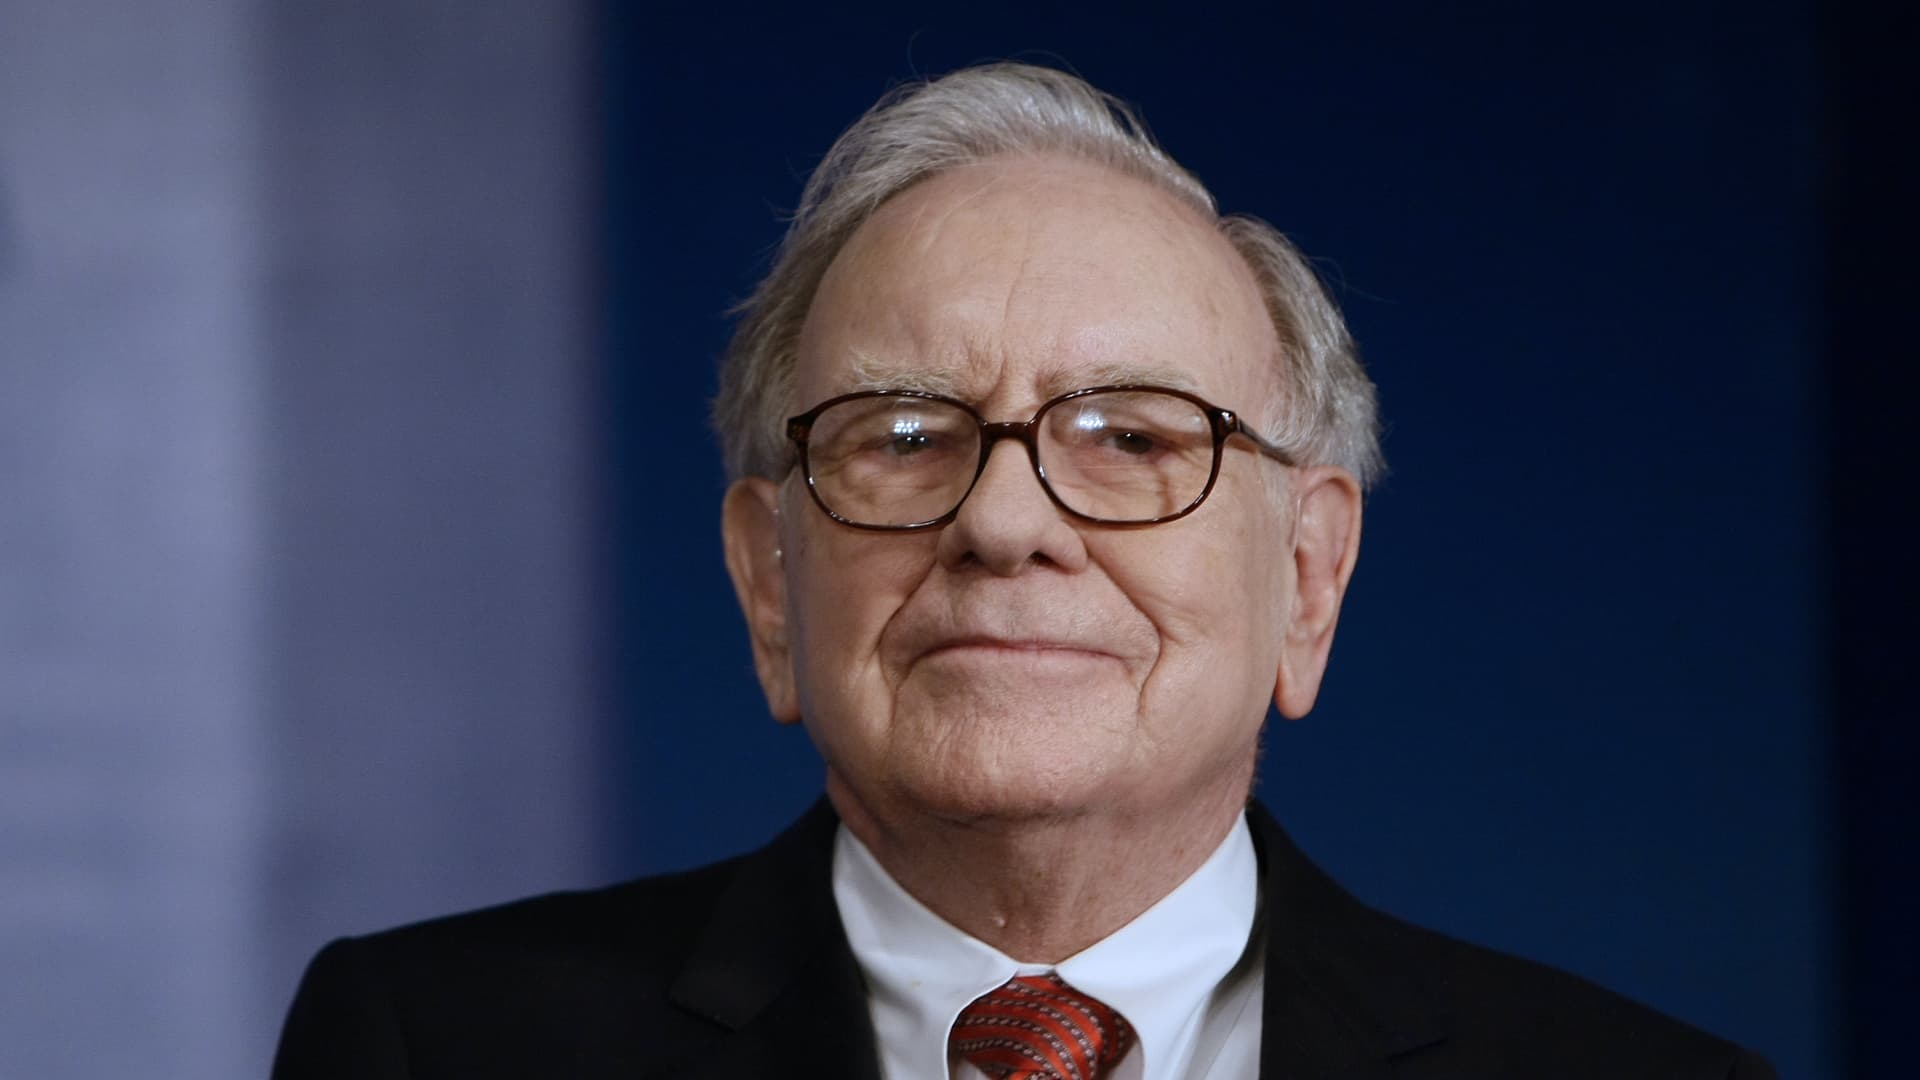 Warren Buffett in annual letter calls Apple one of ‘Four Giants’ driving the conglomerate’s value